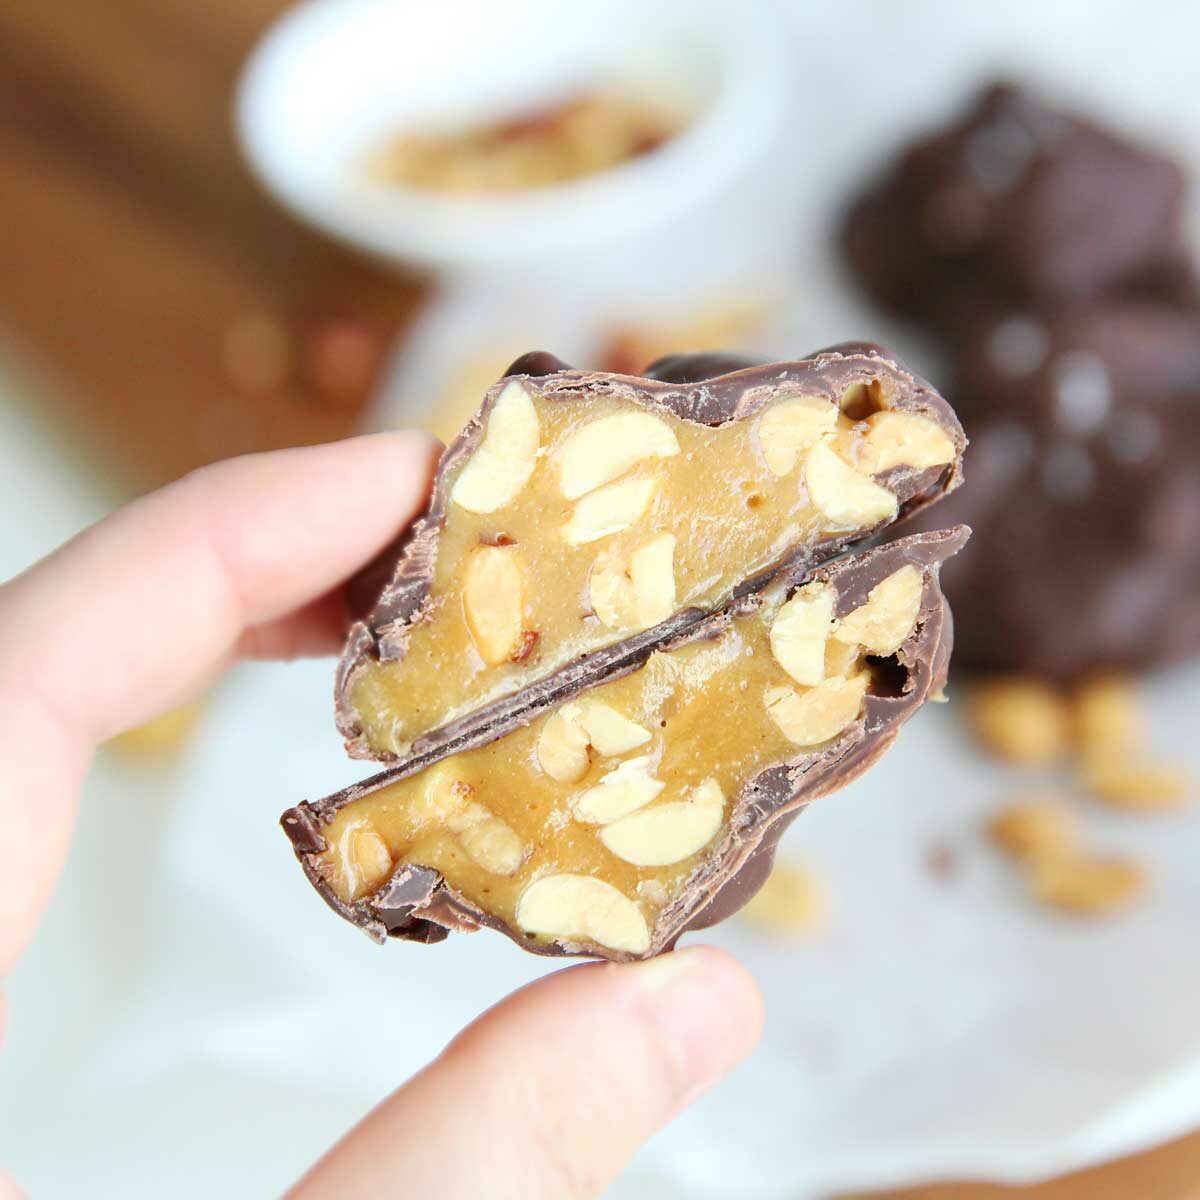 Chocolate Peanut Clusters with Collagen Caramel Filling (Easy, Keto Recipe) - Peanut Clusters with Collagen